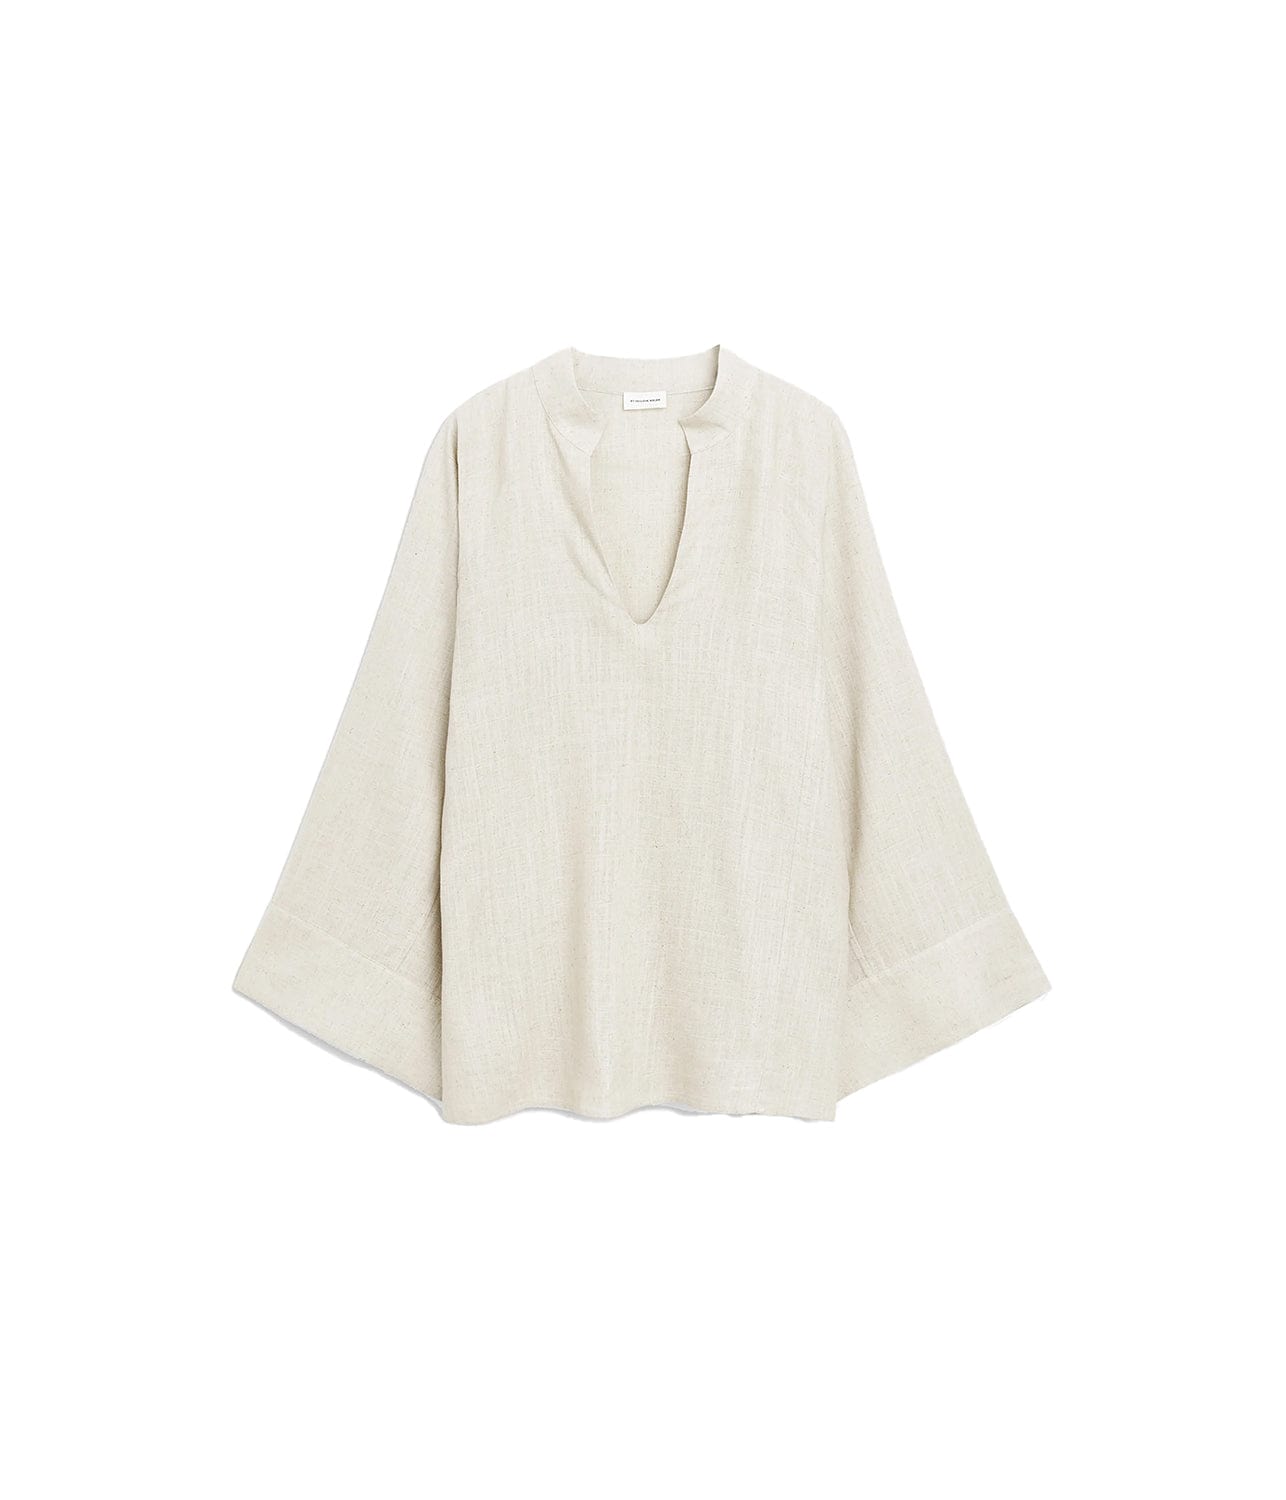 LOMARIA BLOUSE- UNDYED | BY MALENE BIRGER |  BY MALENE BIRGER LOMARIA BLOUSE- UNDYED